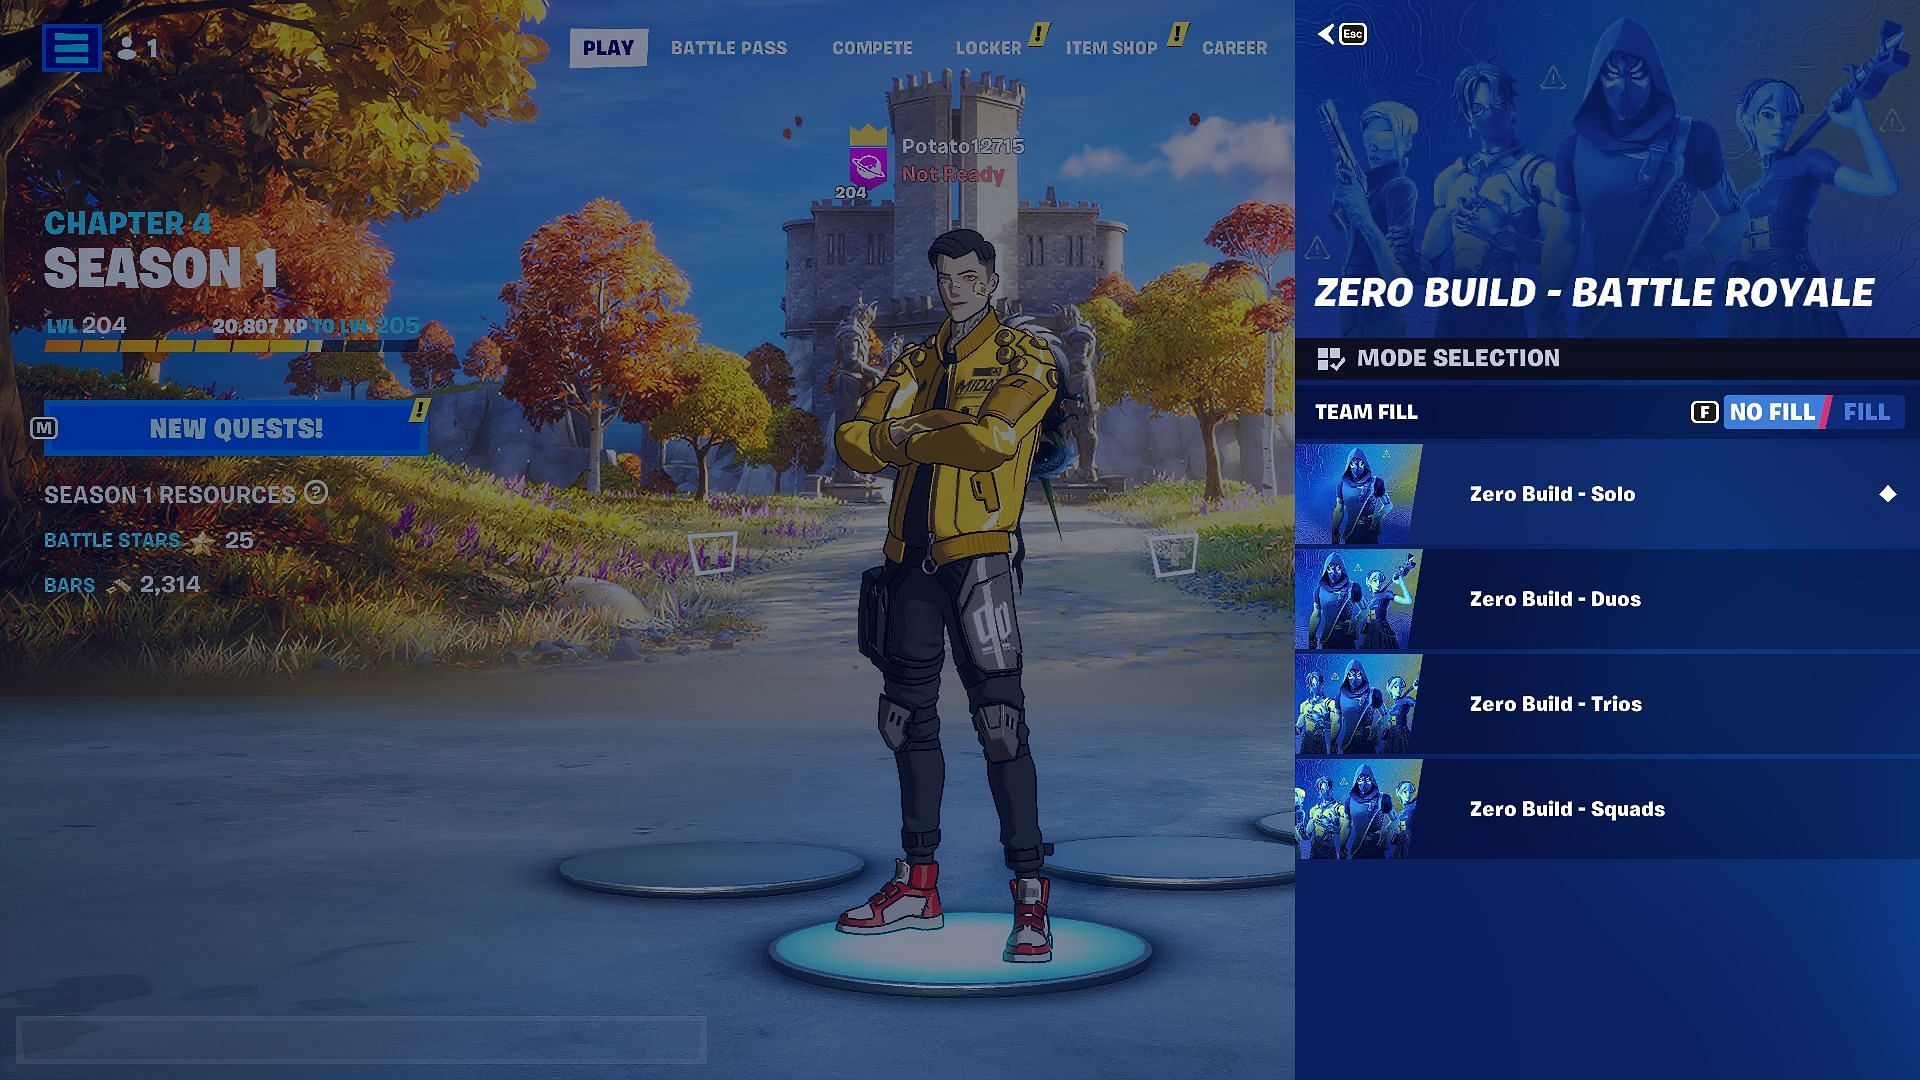 Adding more playlists to the game may not be a good idea (Image via Epic Games/Fortnite)